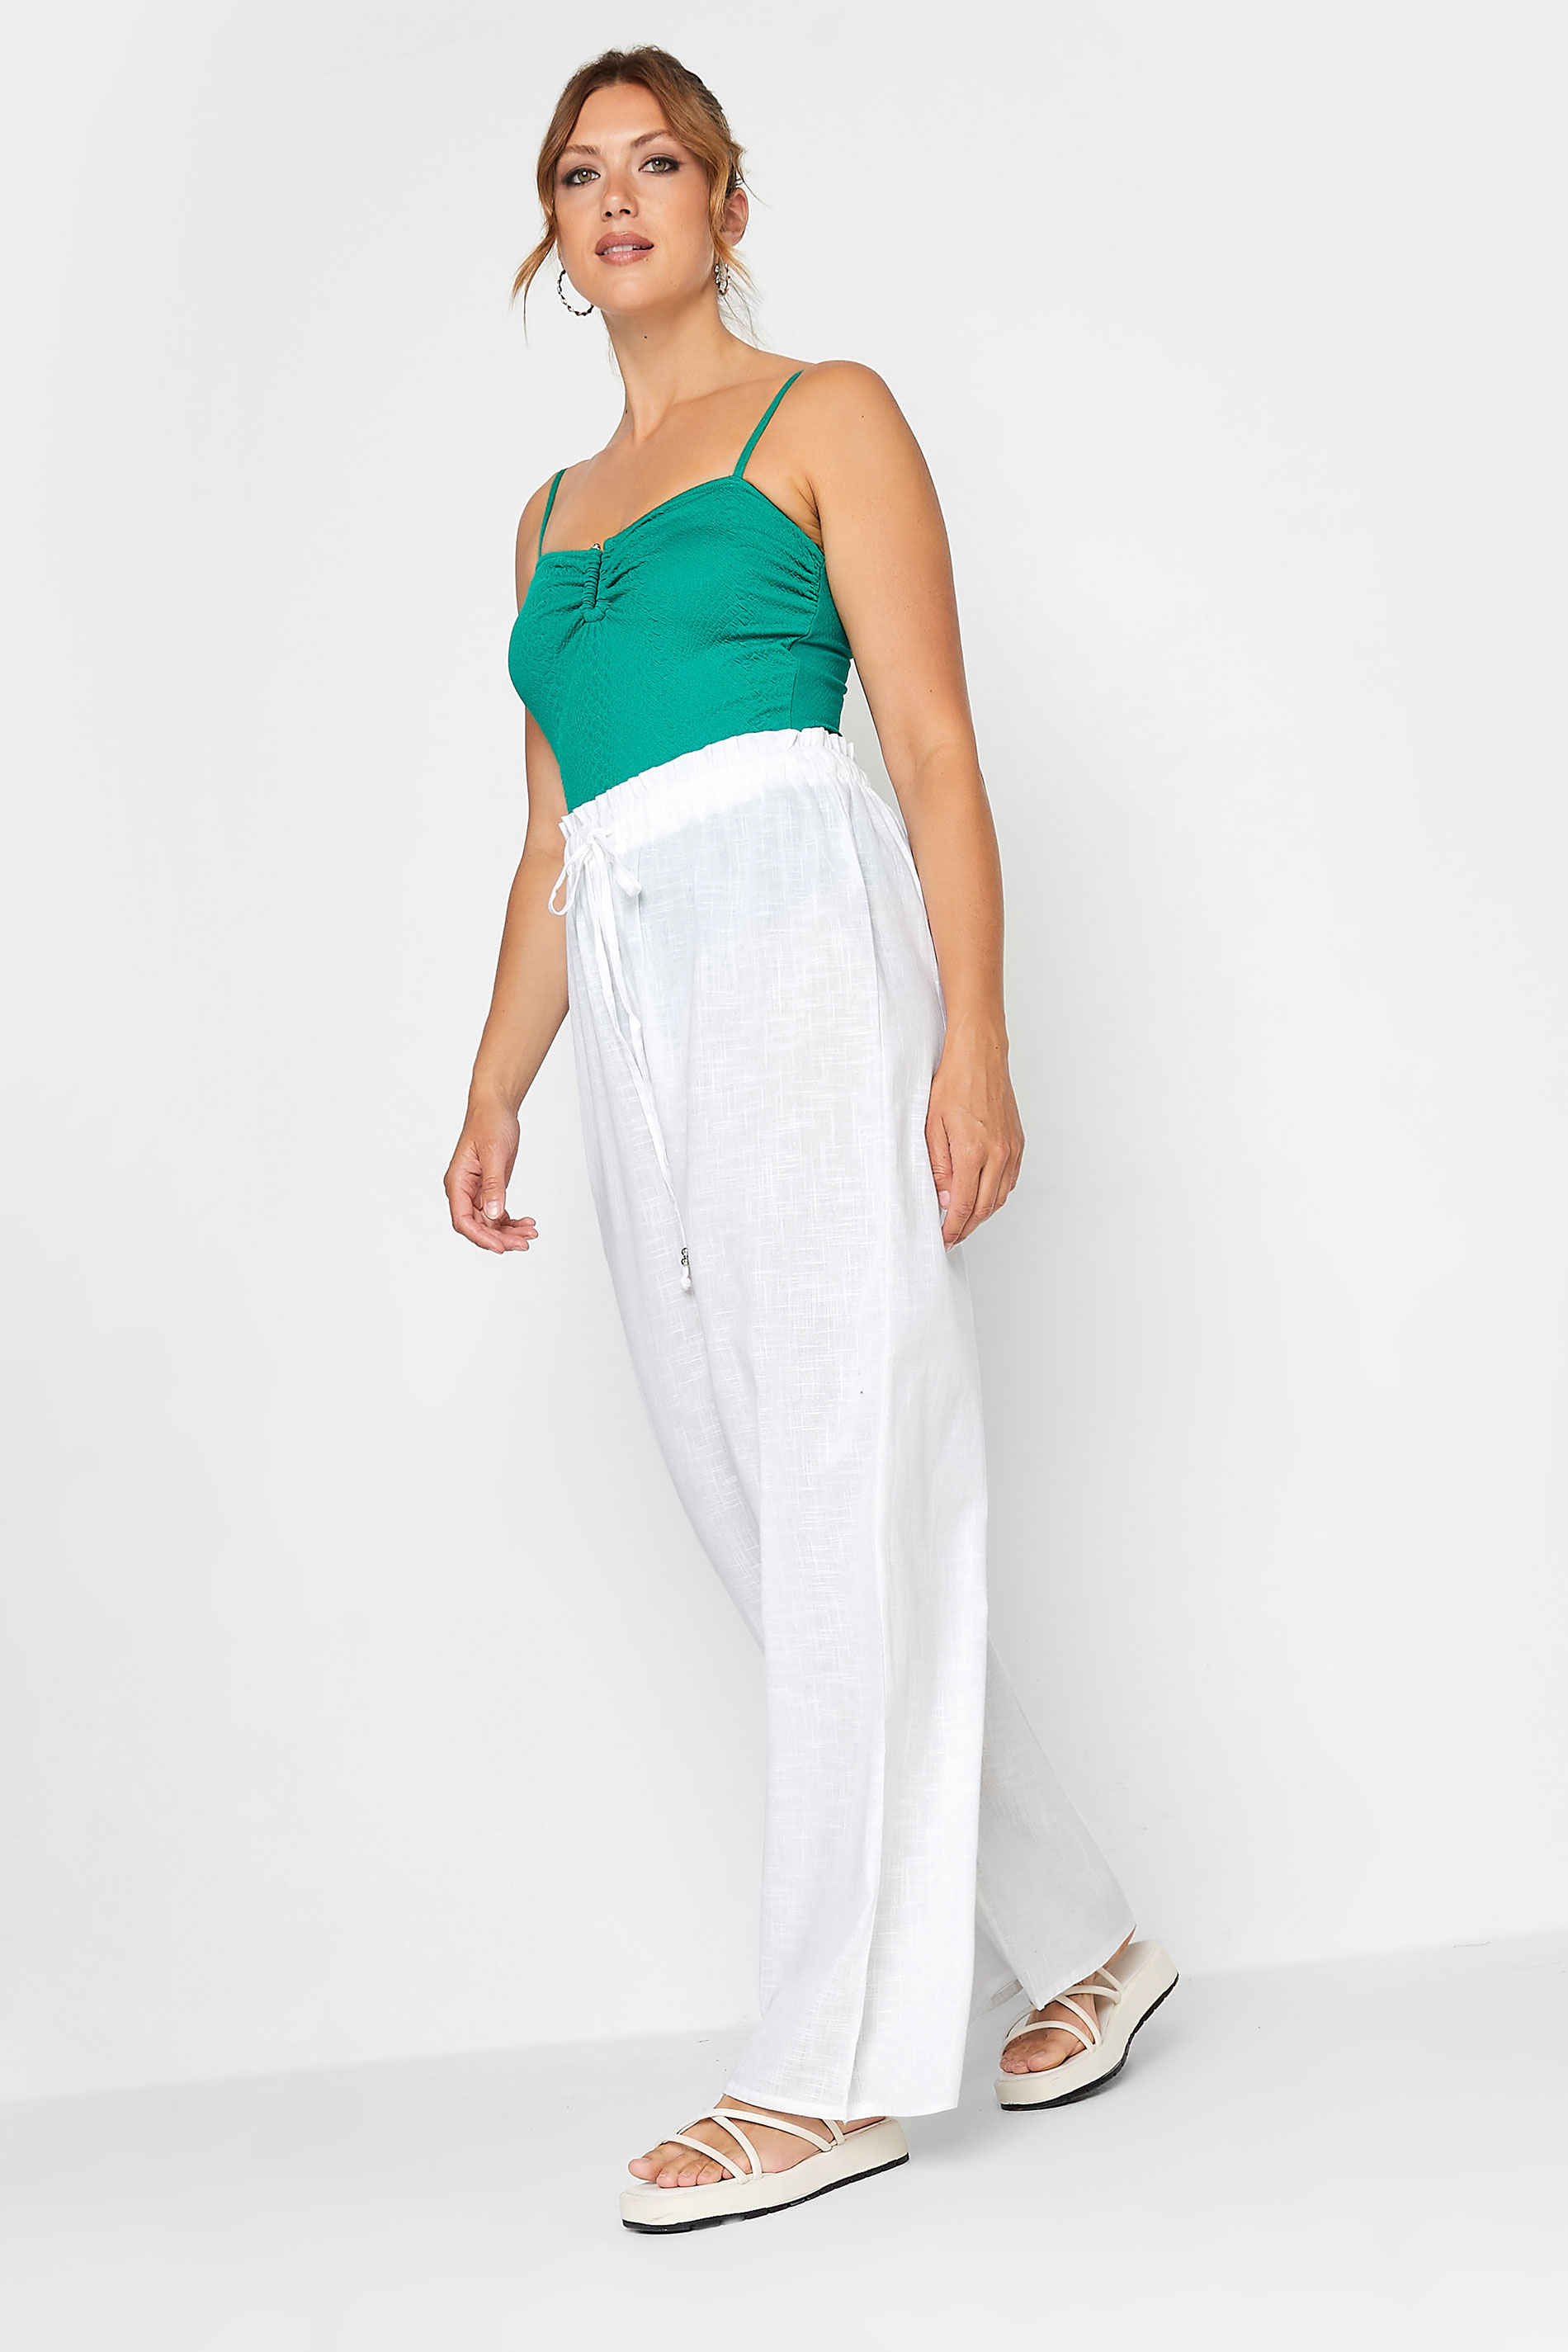 Xihbxyly Linen Pants for Women, Wide Leg Pants for Women Summer High  Waisted Cotton Linen Palazzo Pants Wide Leg Long Baggy Lounge beach Trousers  with Pocket # Sales Today Clearance Prime Only #